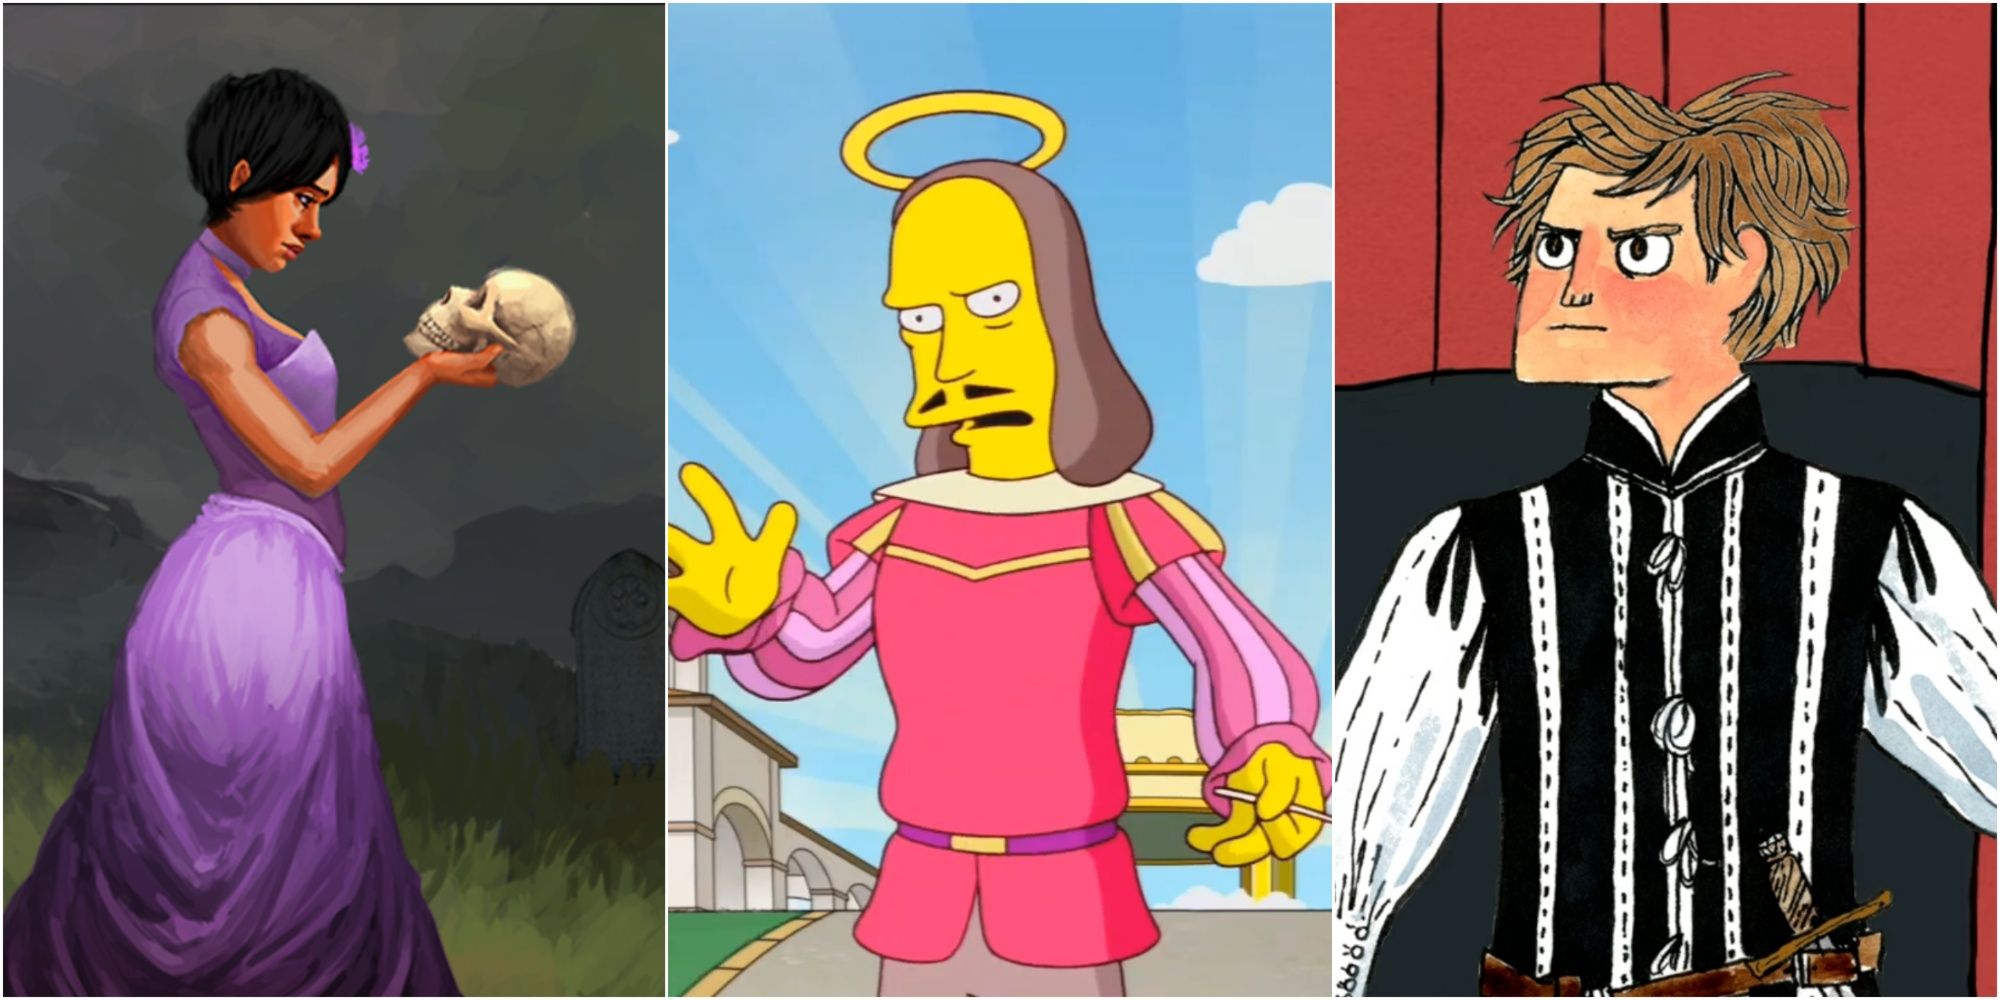 Images of Ophelia in Elsinore, Shakespeare in The Simpsons Game and Hamlet in To Be Or Not To Be